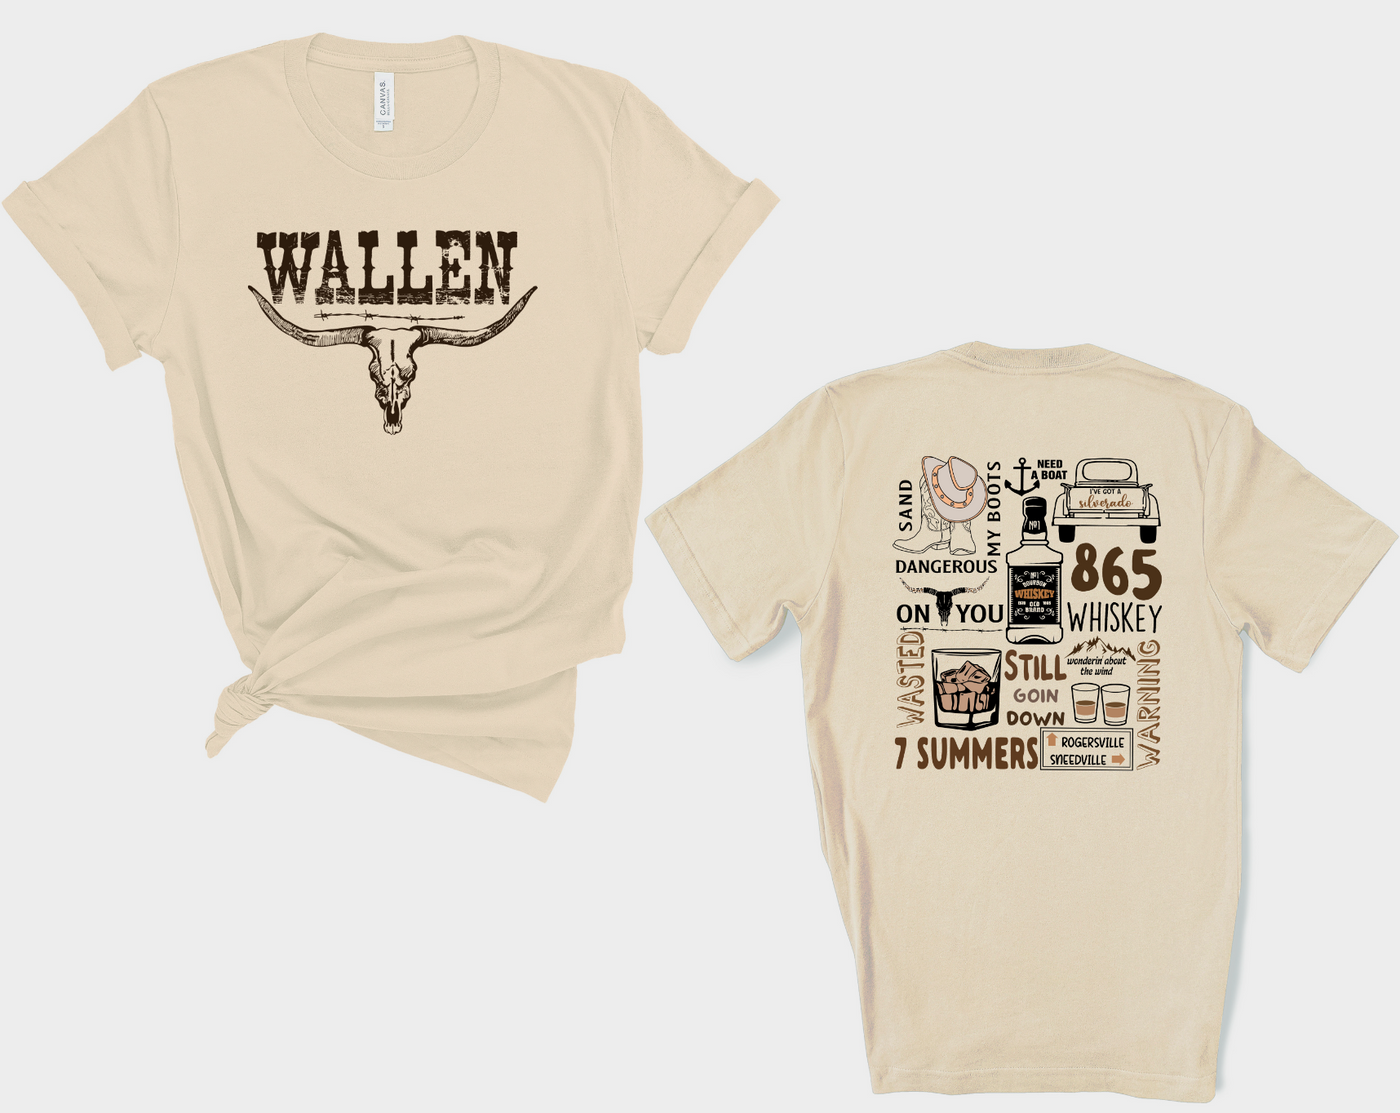 W A L L L E N (front and back)